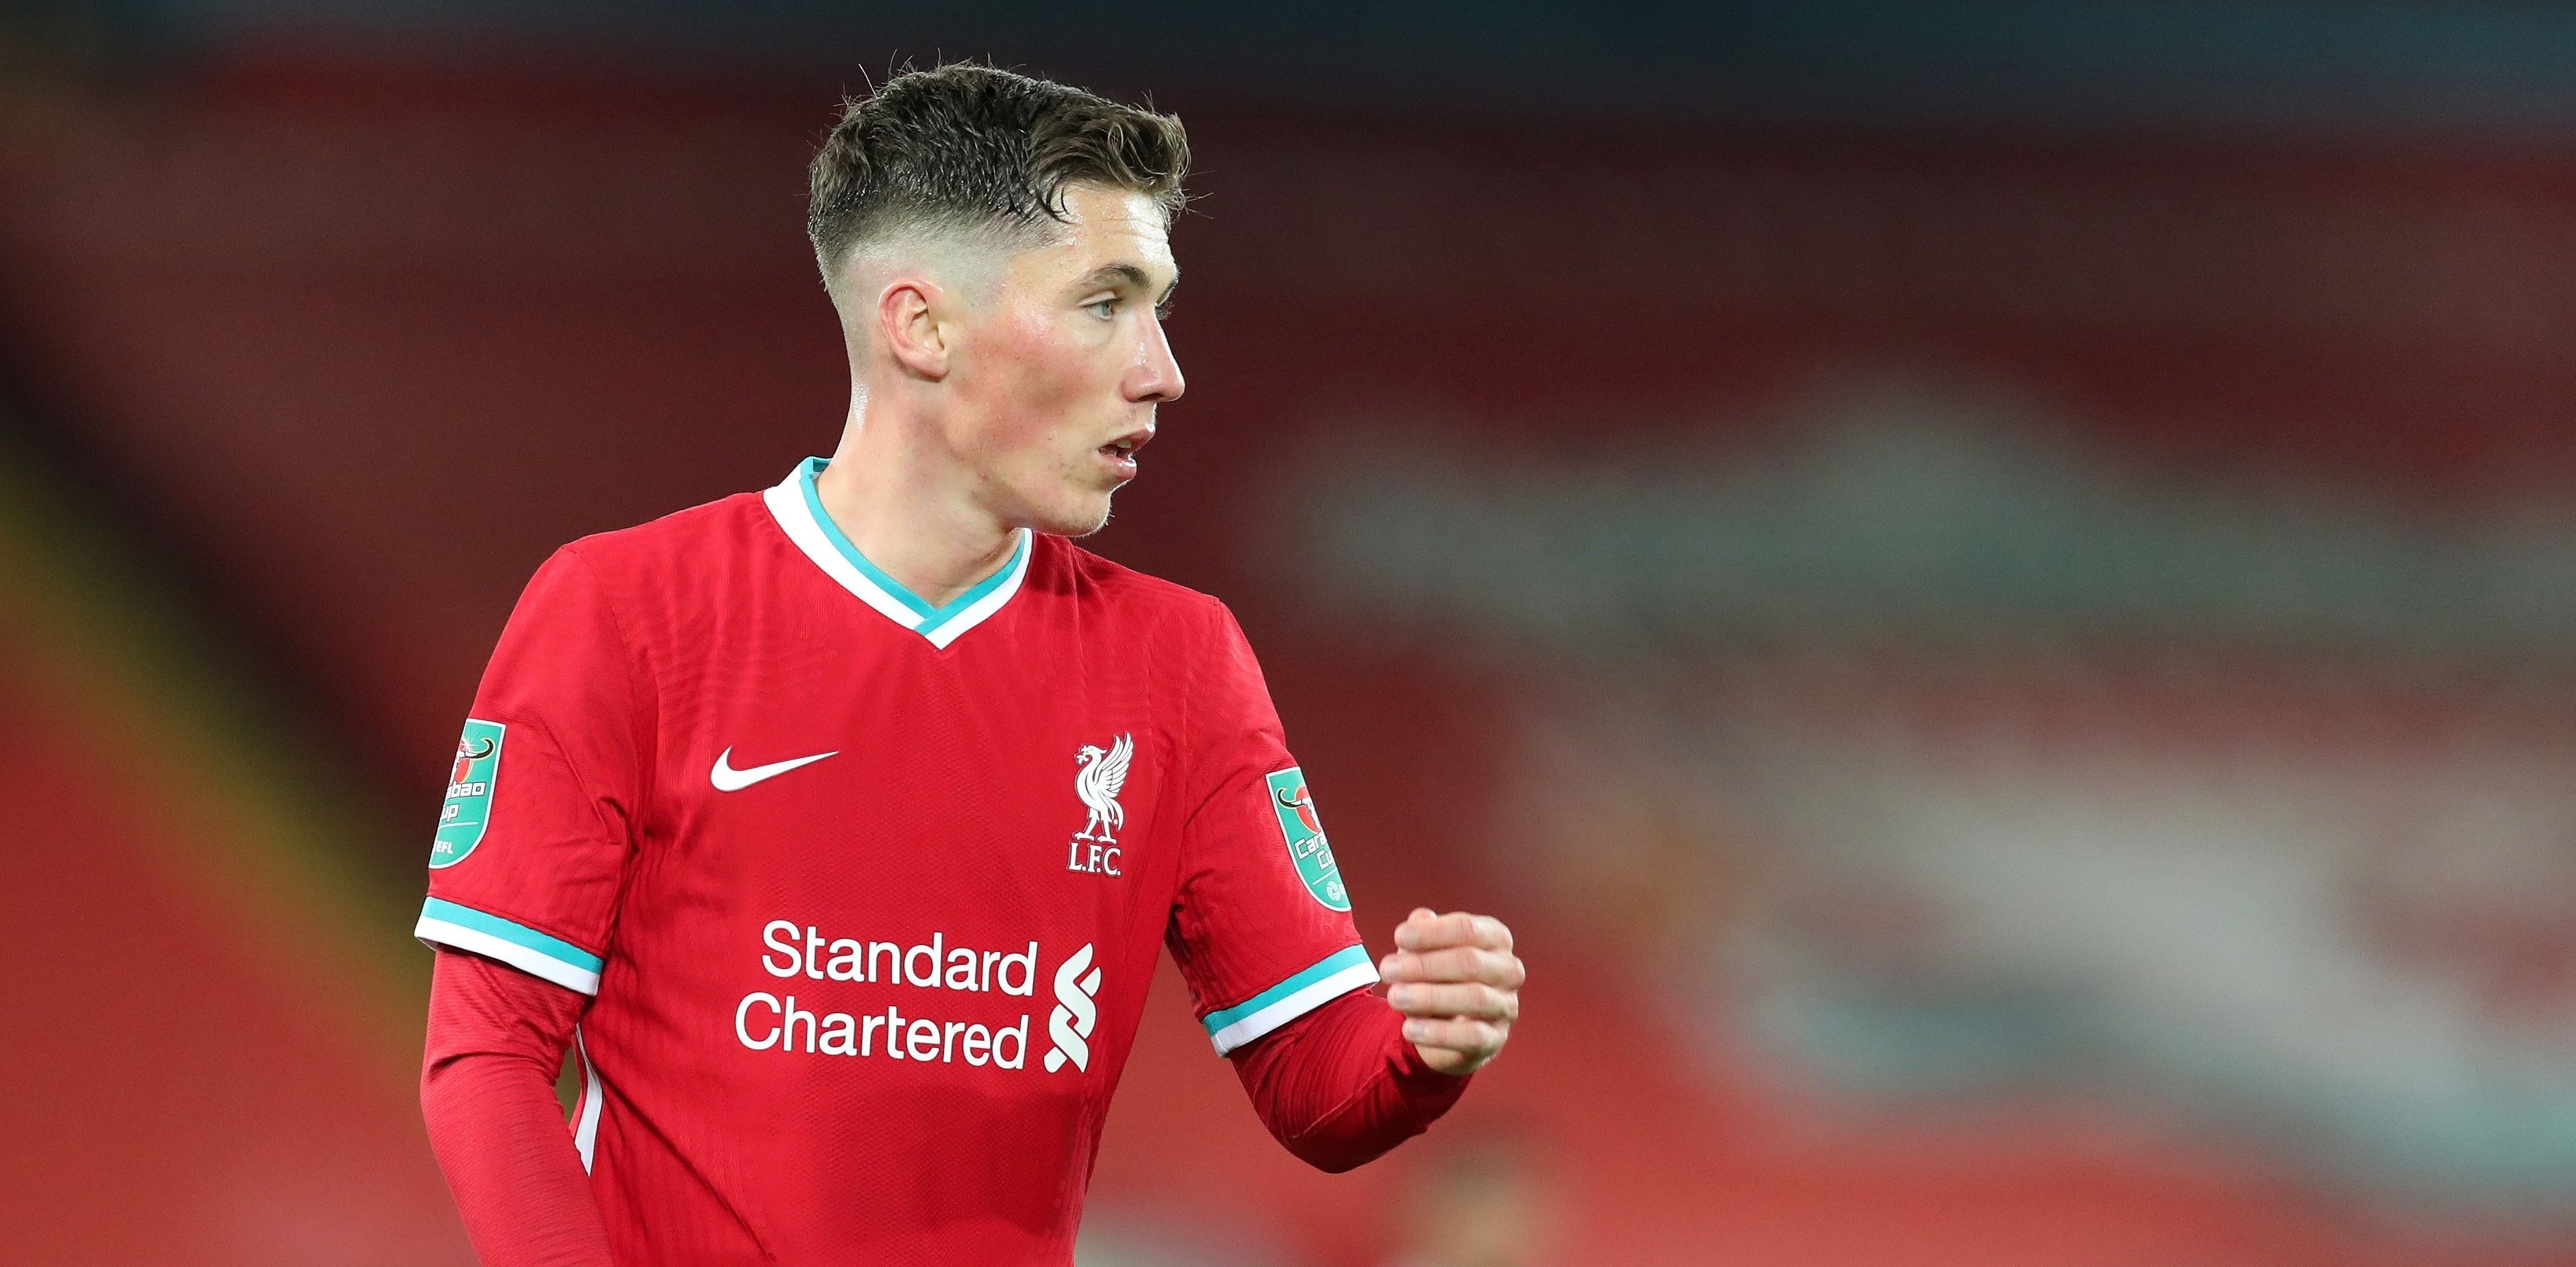 ‘Liverpool will have to speculate to accumulate’ – Ex-PL star tips Reds to sell 7-goal forward to boost summer spending